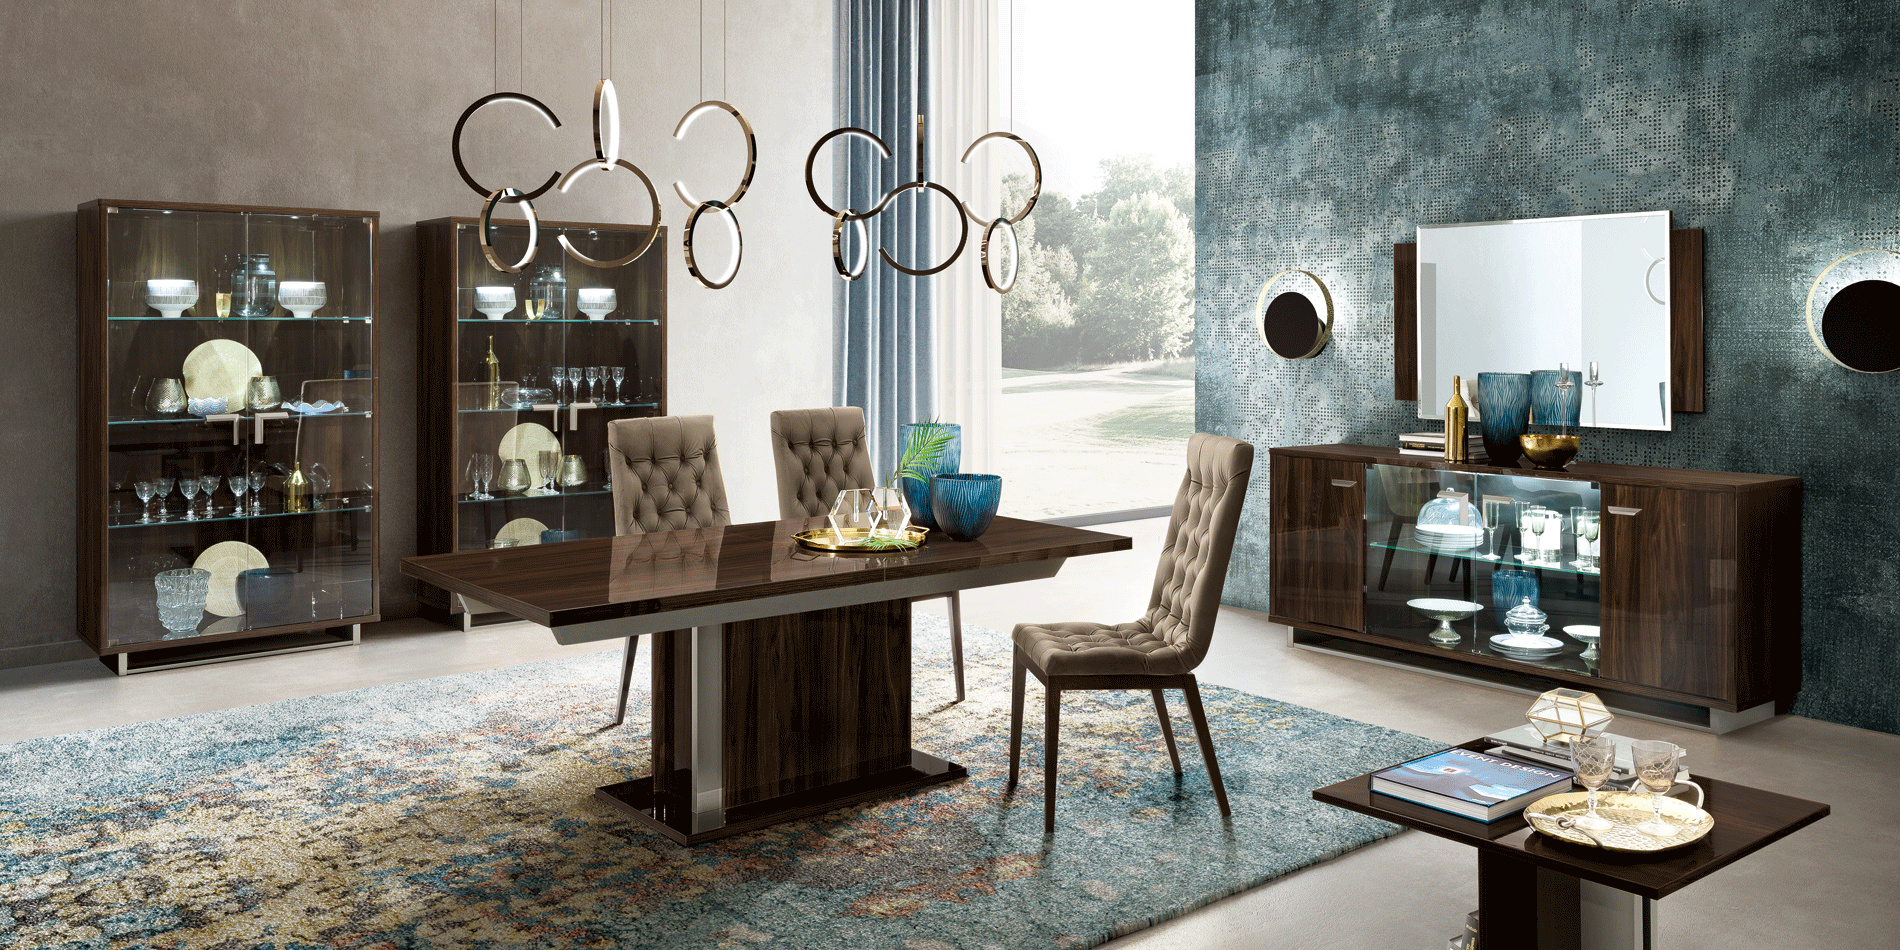 Dining Room Furniture Kitchen Tables and Chairs Sets Volare Dining room Dark Walnut/Nickel Additional items